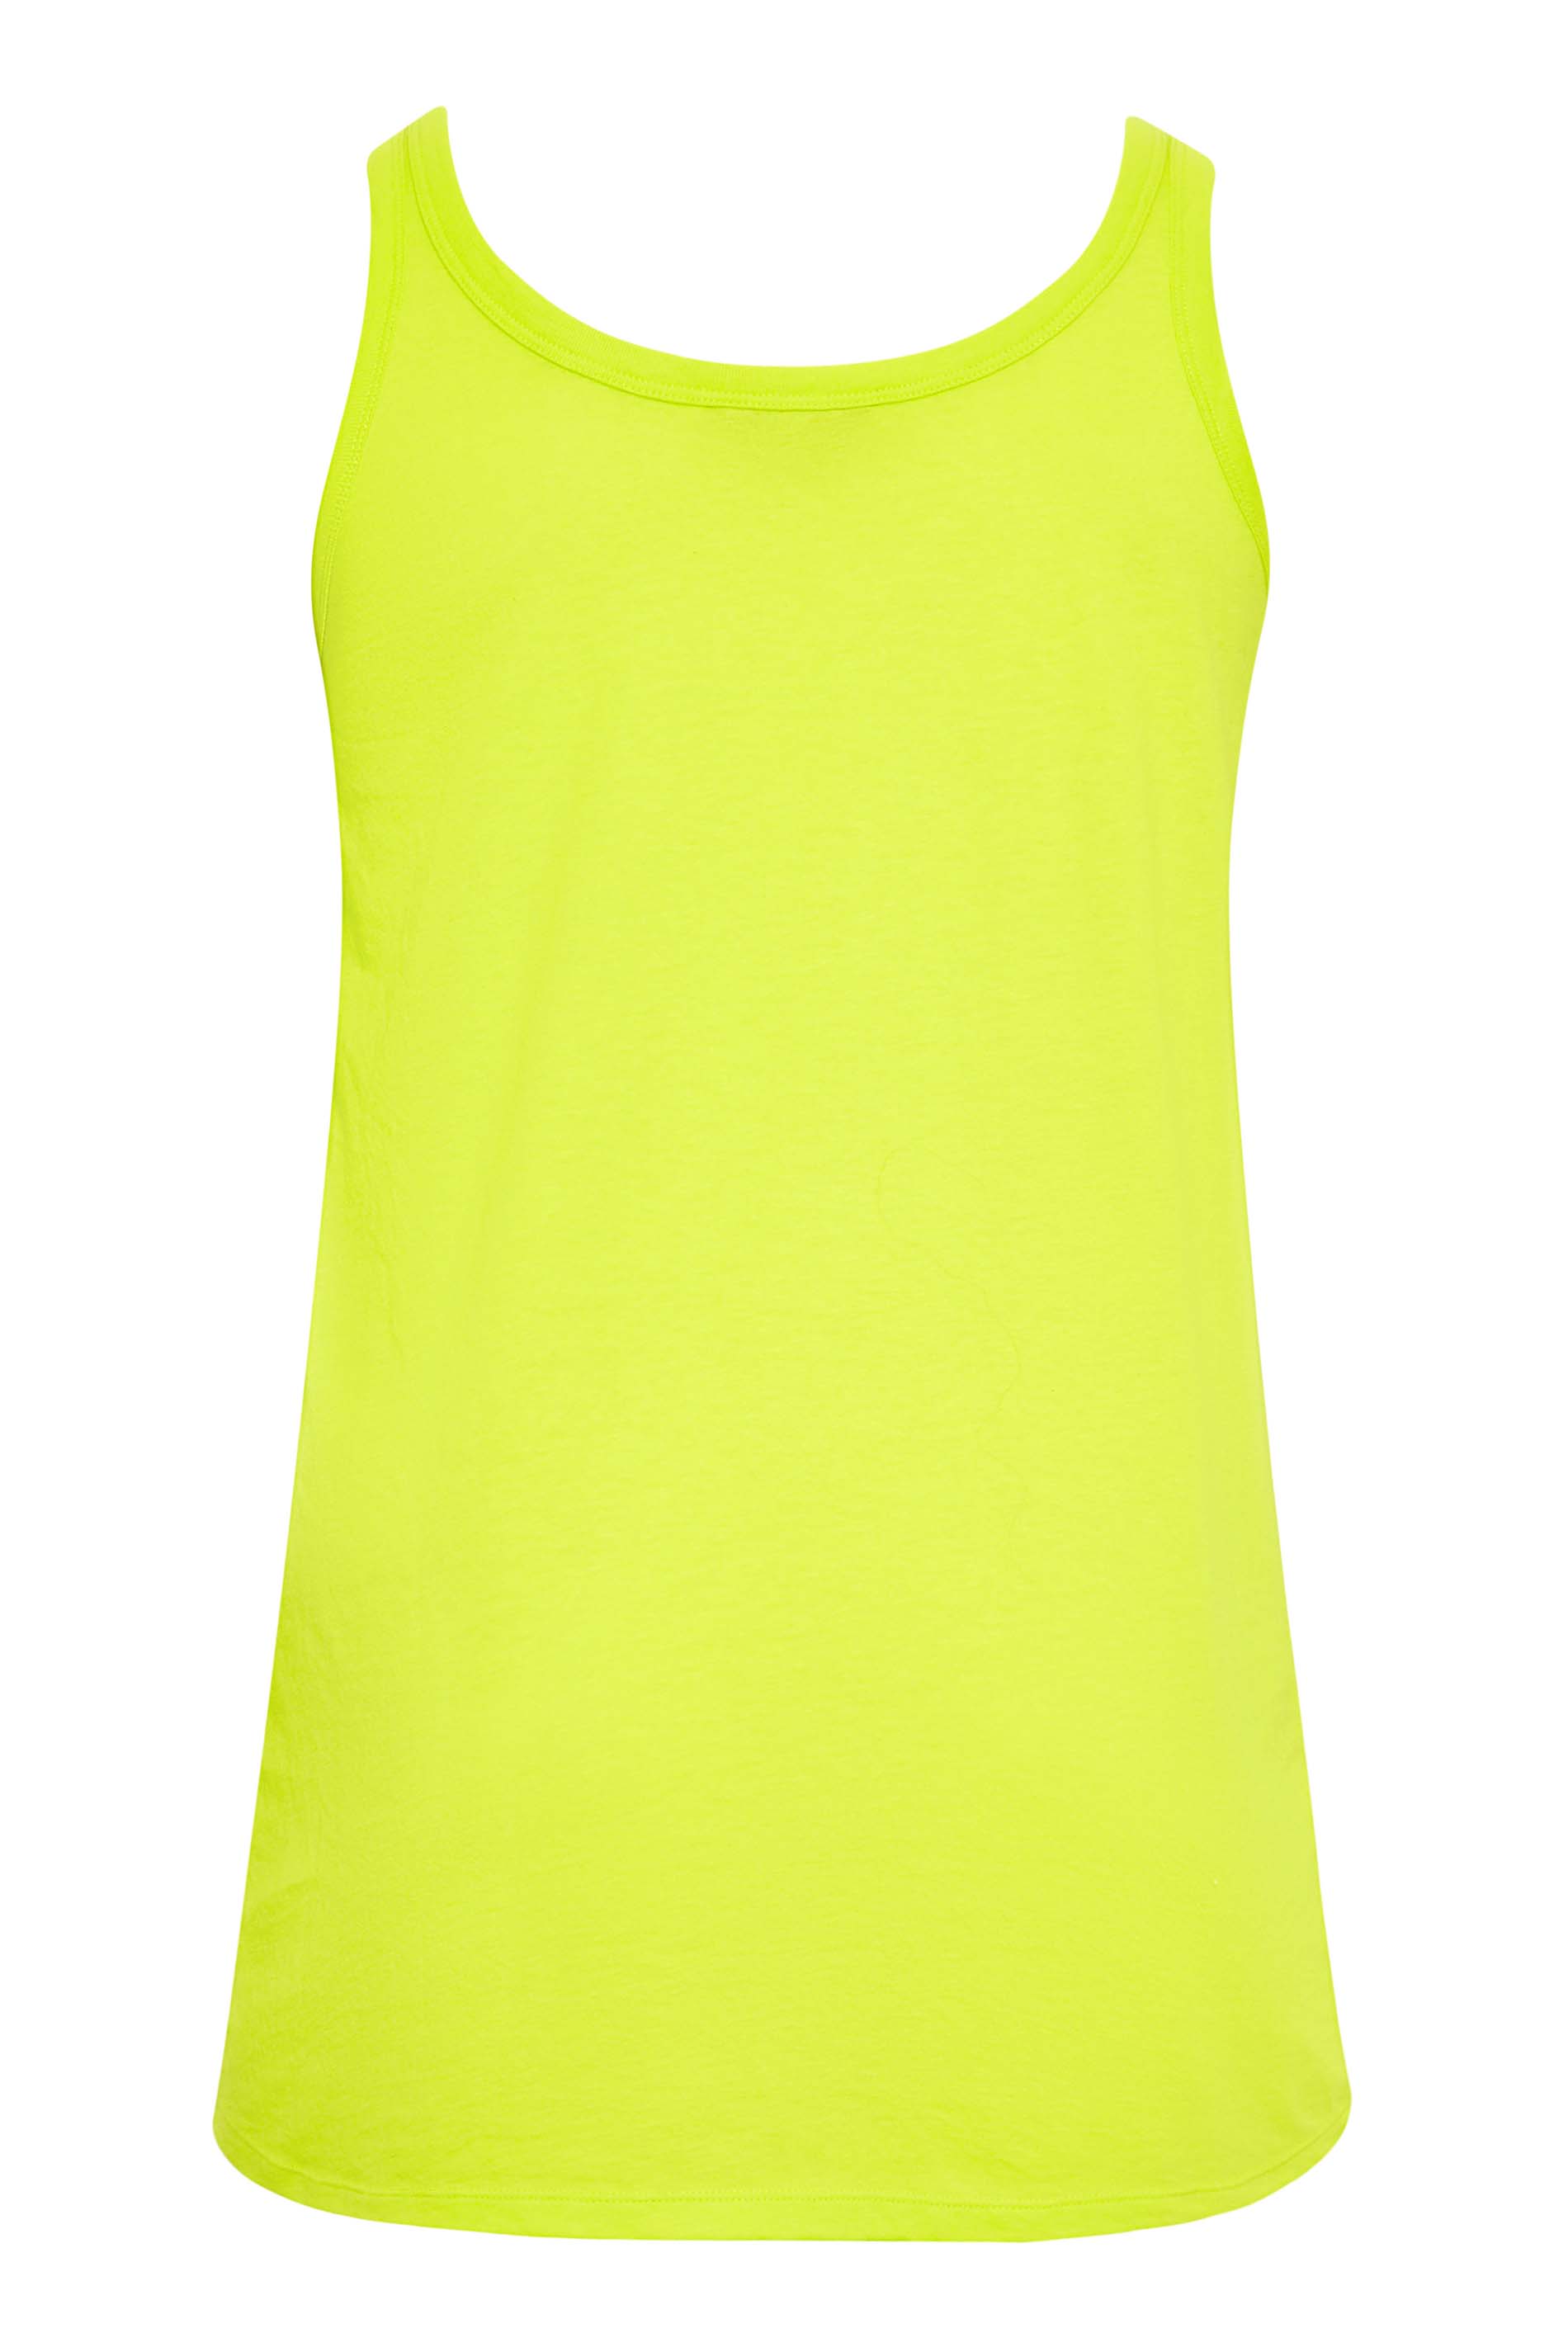 Plus Size Neon Yellow Vest Top | Yours Clothing